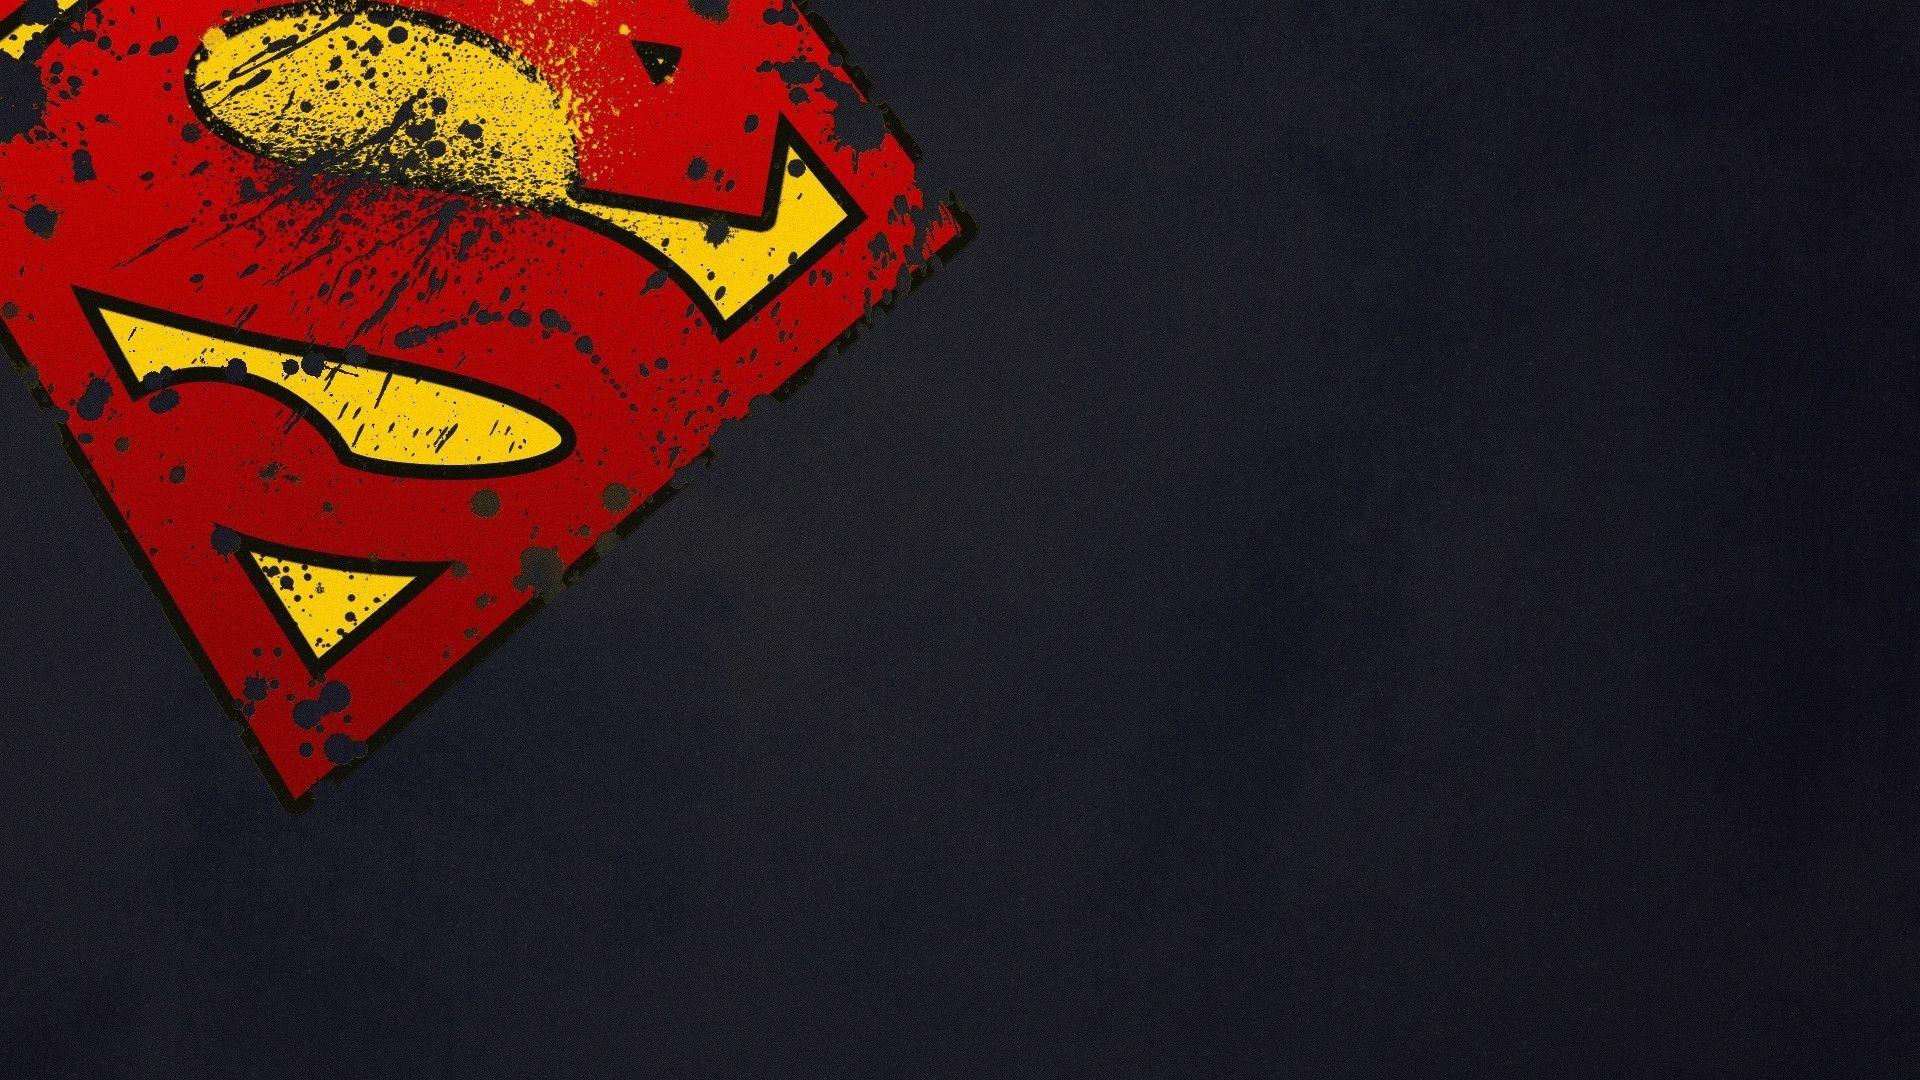 Superhero backgroundDownload free awesome HD background